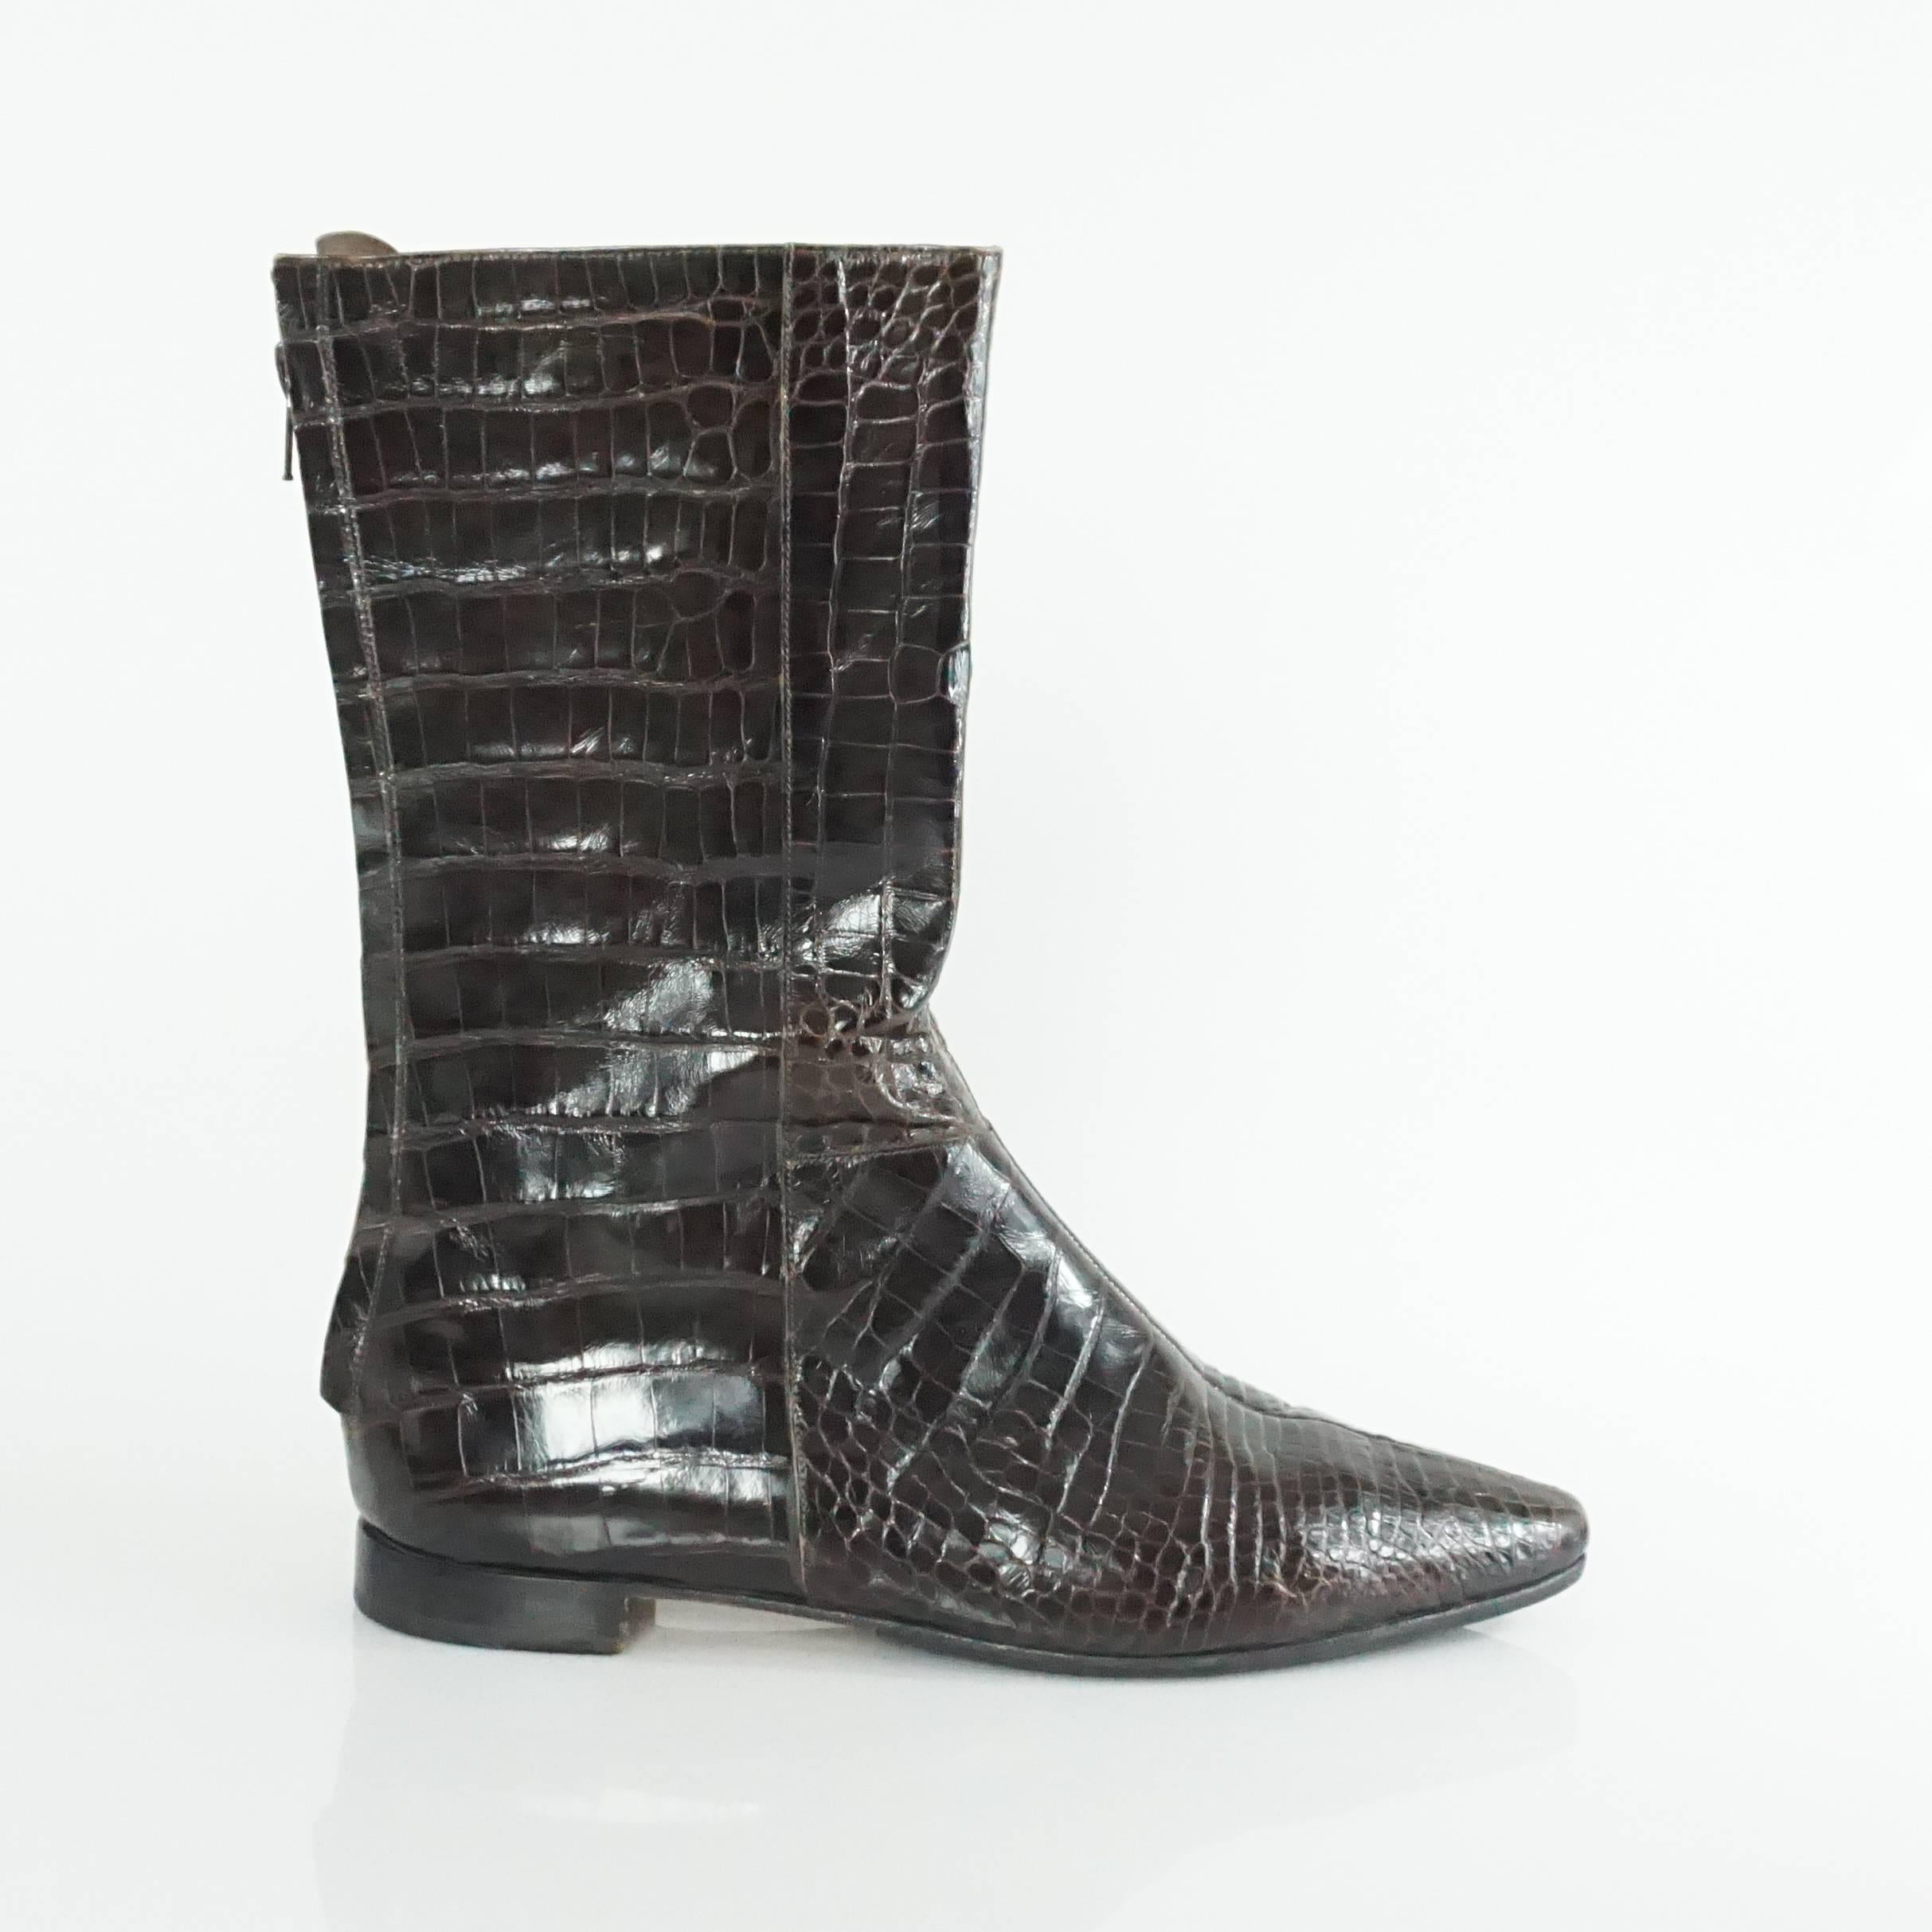 Manolo Blahnik Chocolate Brown Alligator Short Boot - 38.5  These amazing and rich looking boots are in excellent condition. These boots retailed for $8,000 and were worn only twice.

Measurements:
Boot Height: 10.5